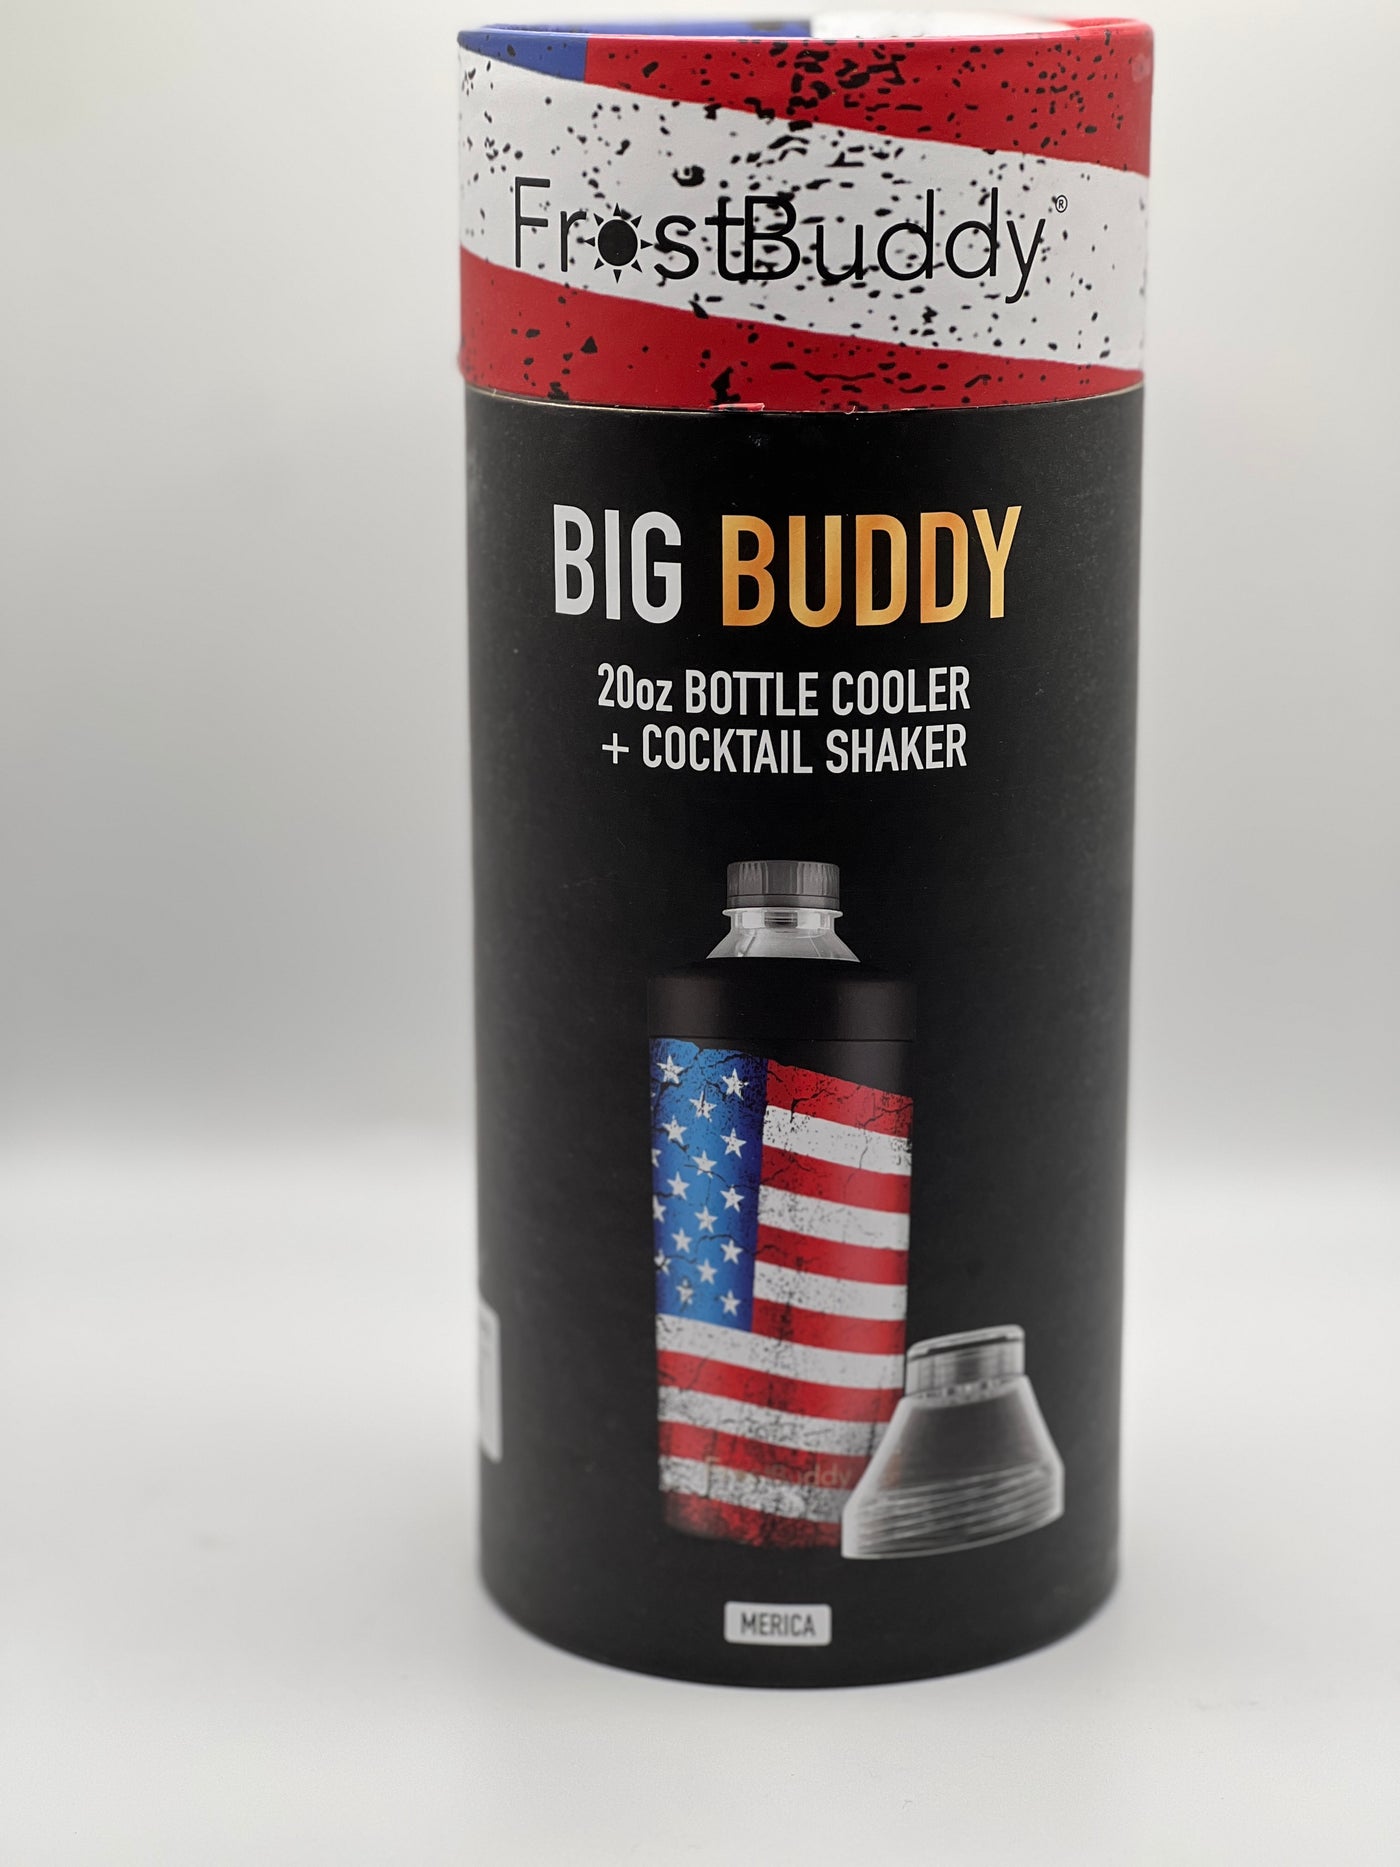  Frost Buddy Universal Can Cooler - Officially Licensed  Collegiate NCAA - Stainless Steel Can Cooler for 12 oz & 16 oz Regular or  Slim Cans & Bottles - Stainless Steel Custom (